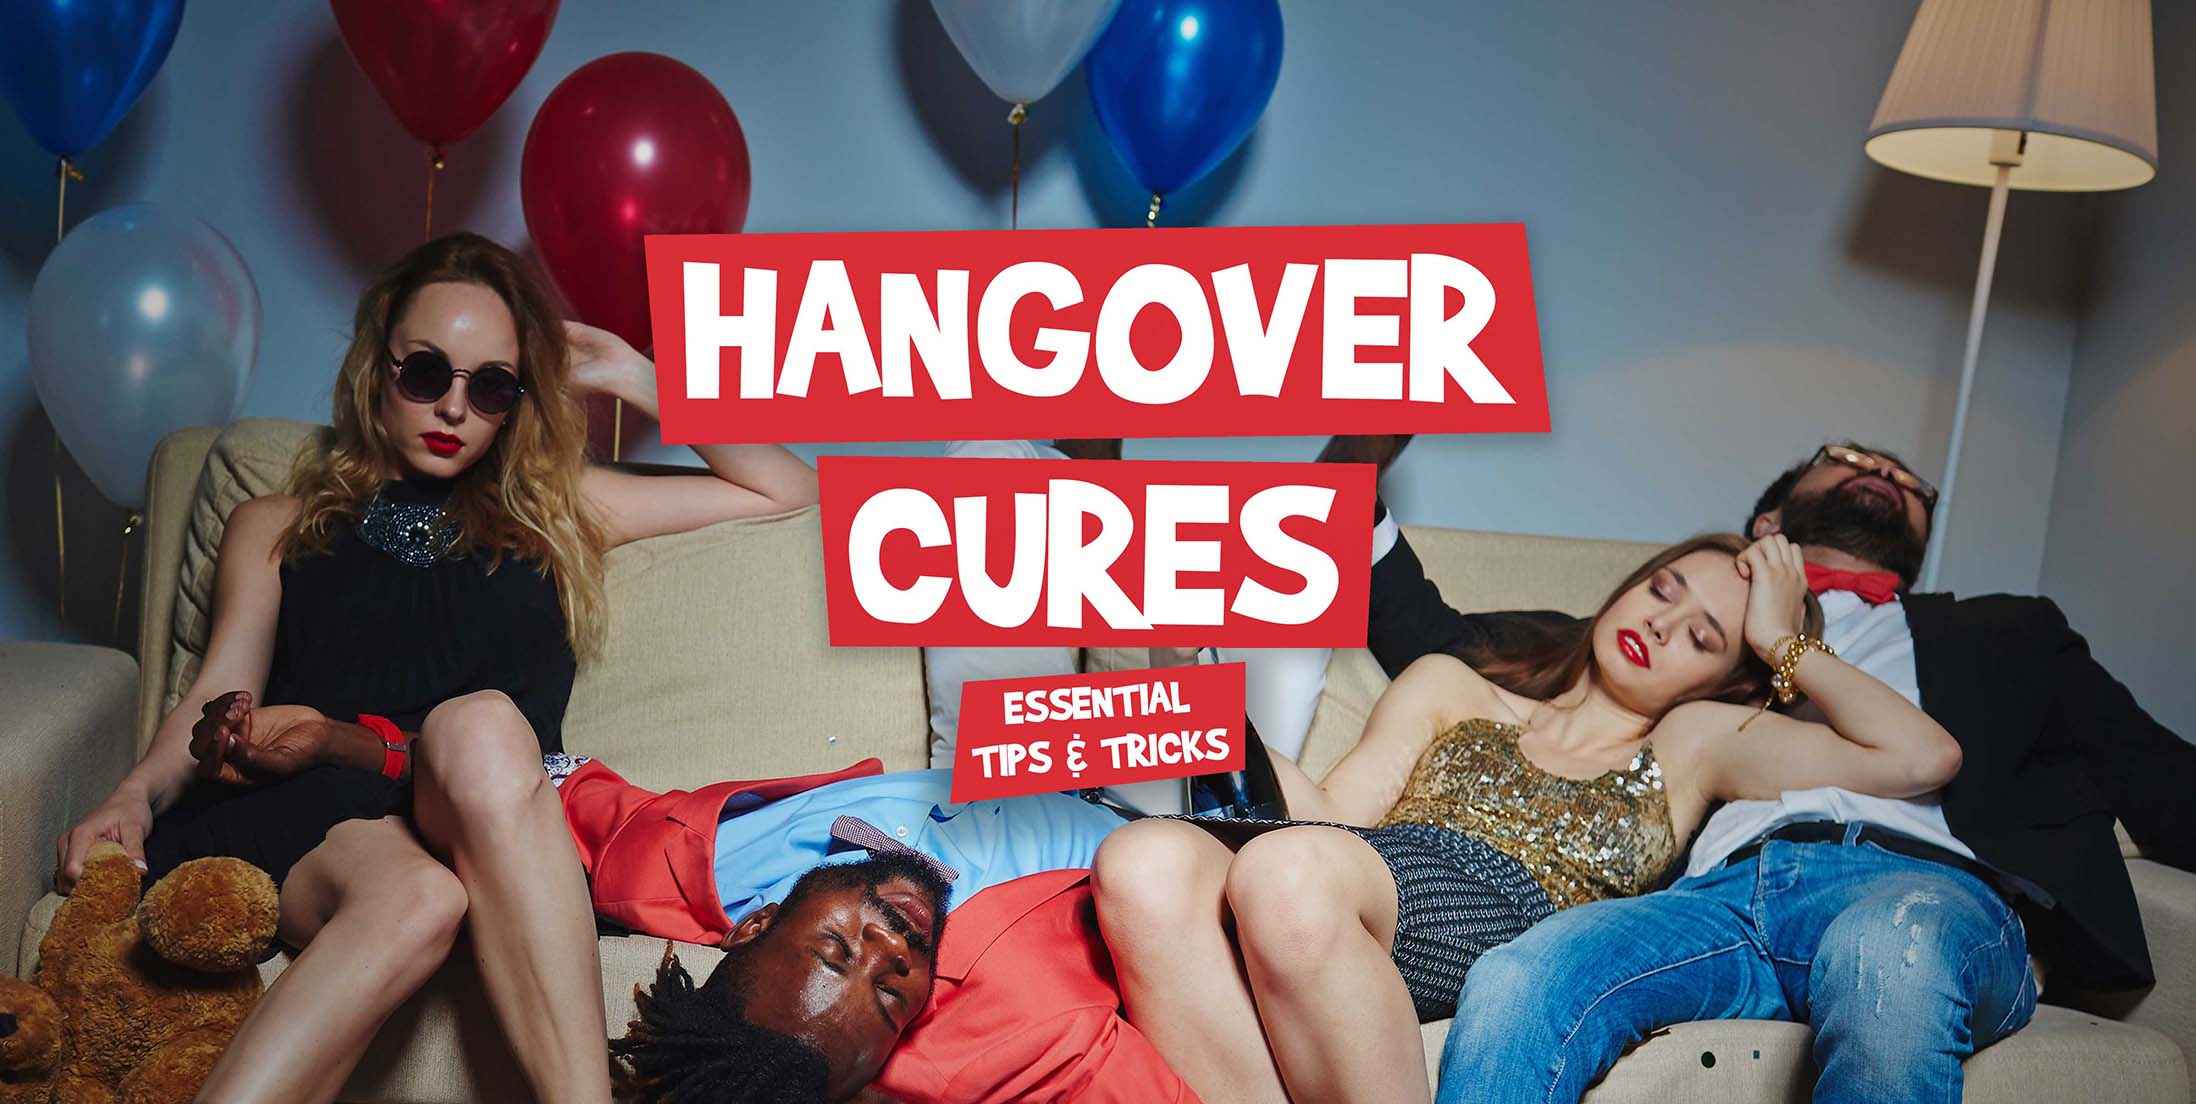 New Year Hangover Cures